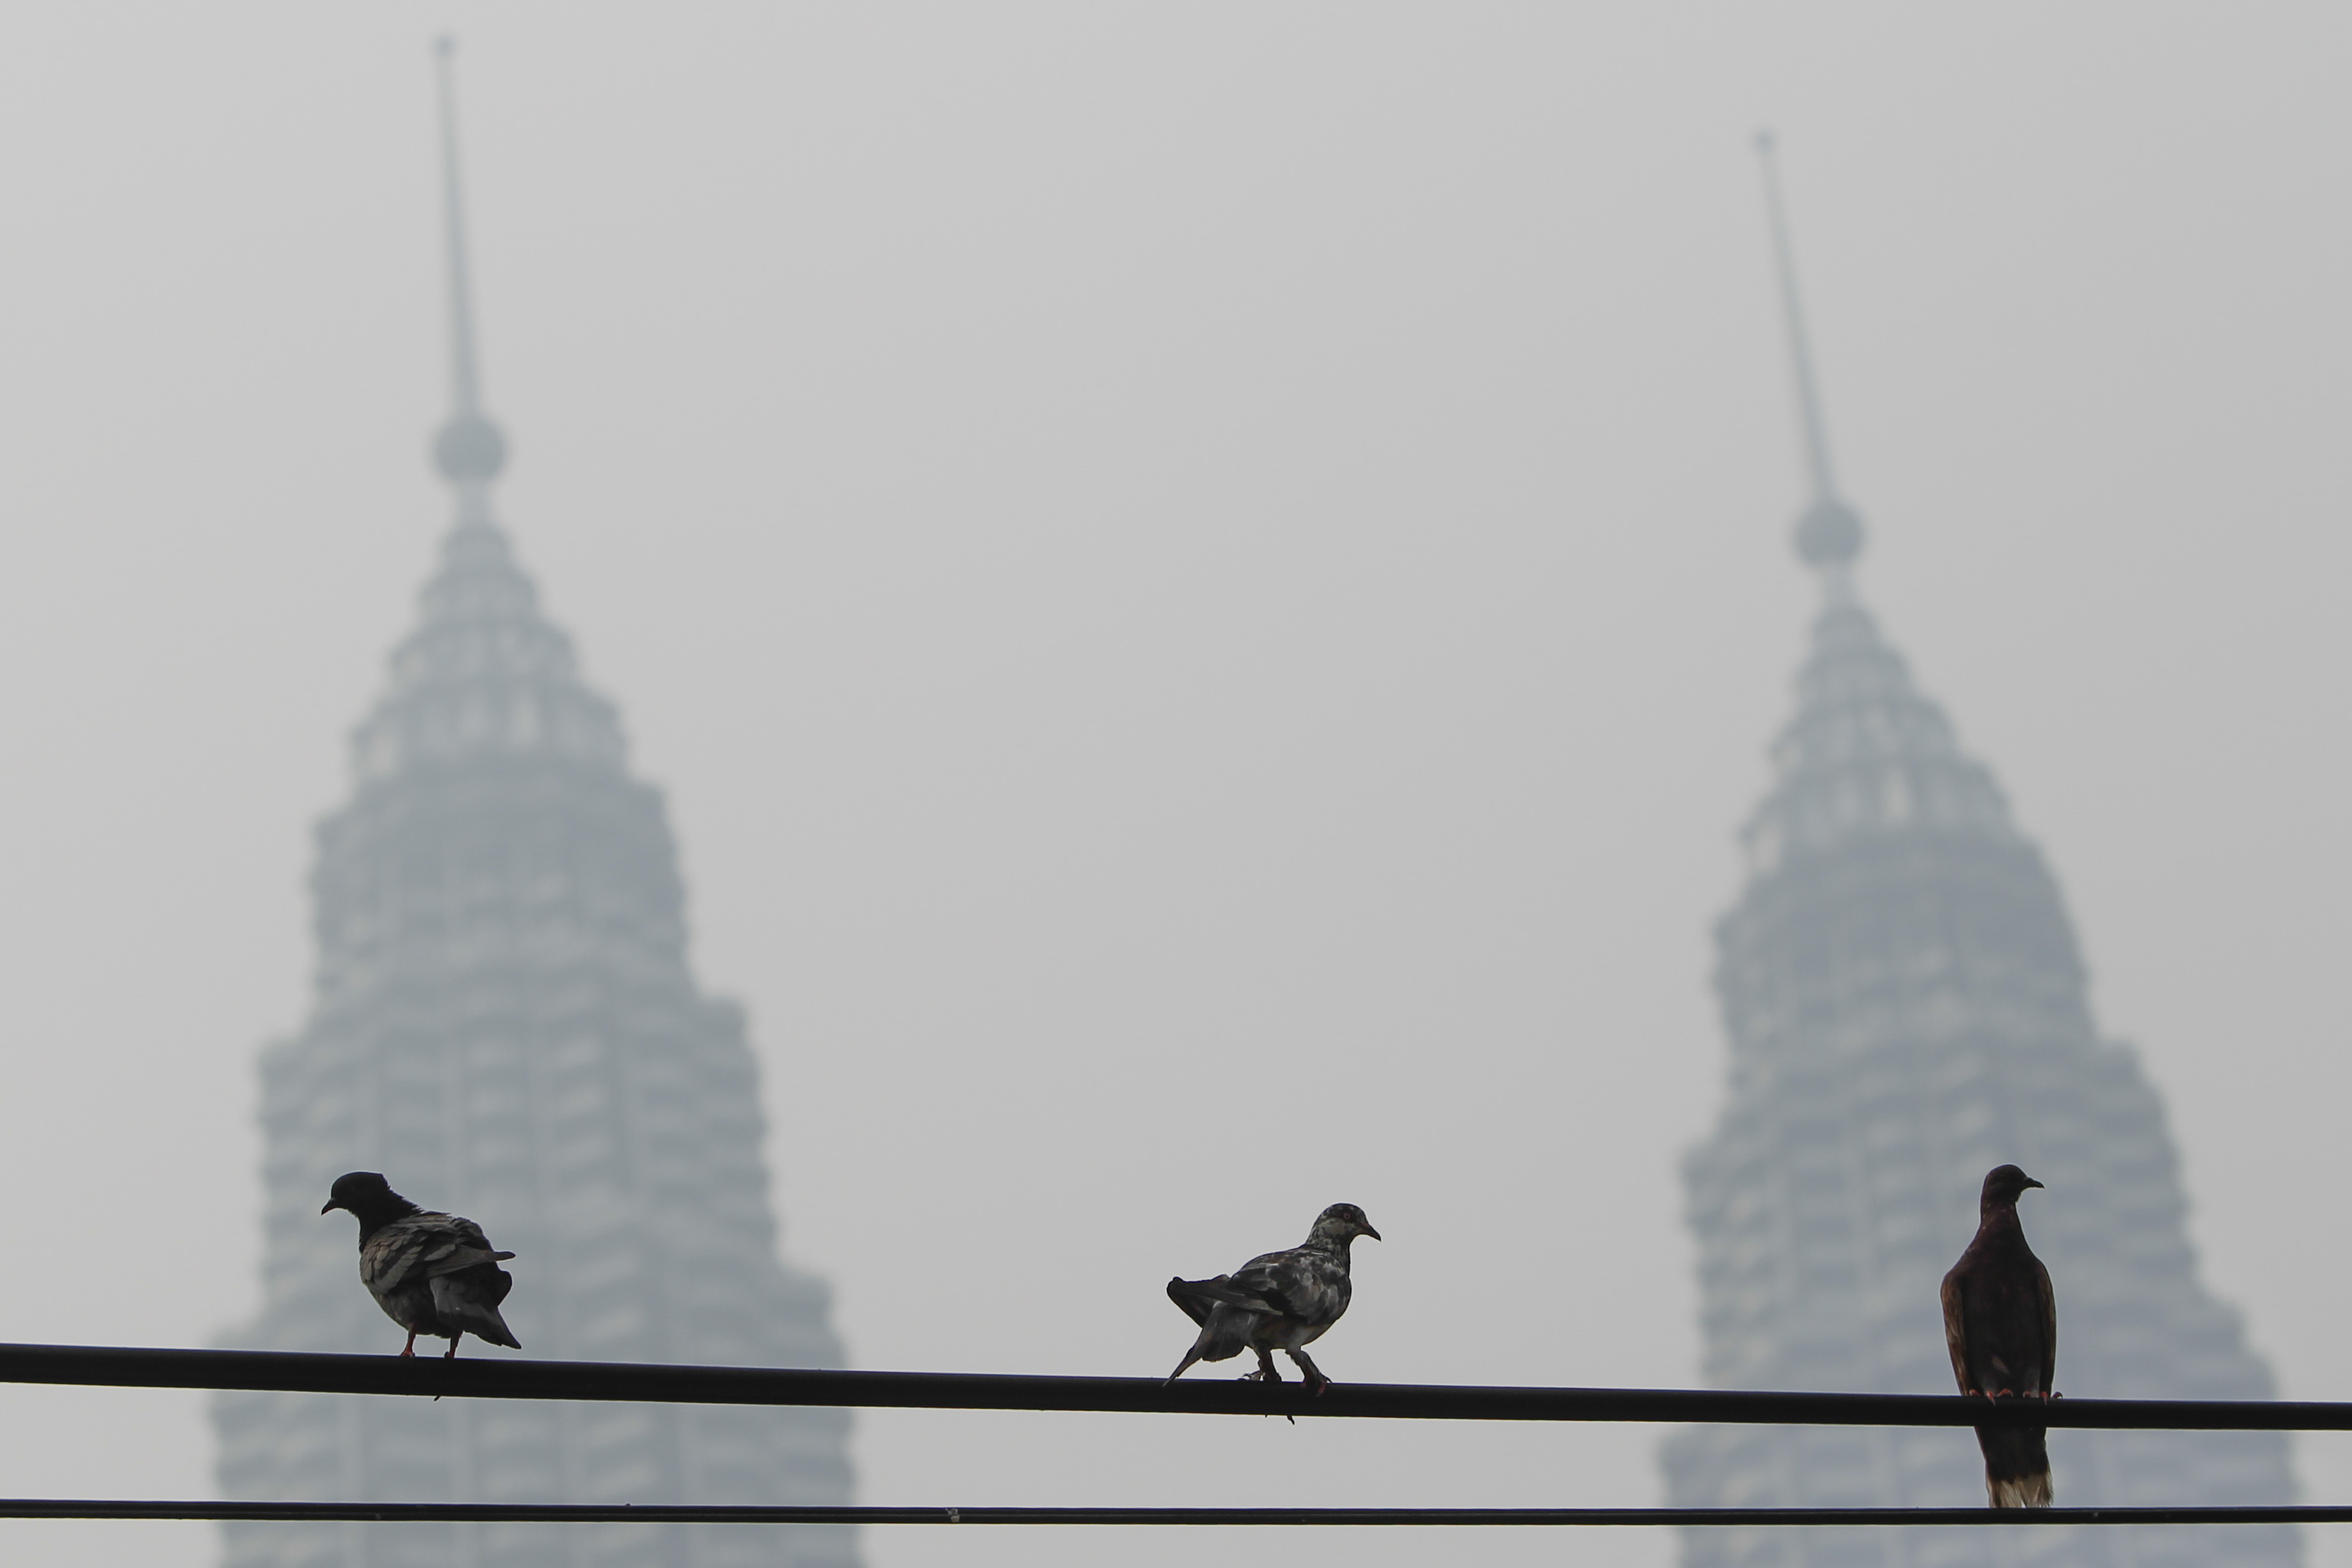 Pigeons perch on a power cable against Malaysia's landmark building, Petronas Twin Towers, shrouded with haze in Kuala Lumpur, on Oct. 4, 2015. The haze is caused by the burning of forests in Indonesia's Sumatra and Borneo islands (Joshua Paul—AP)